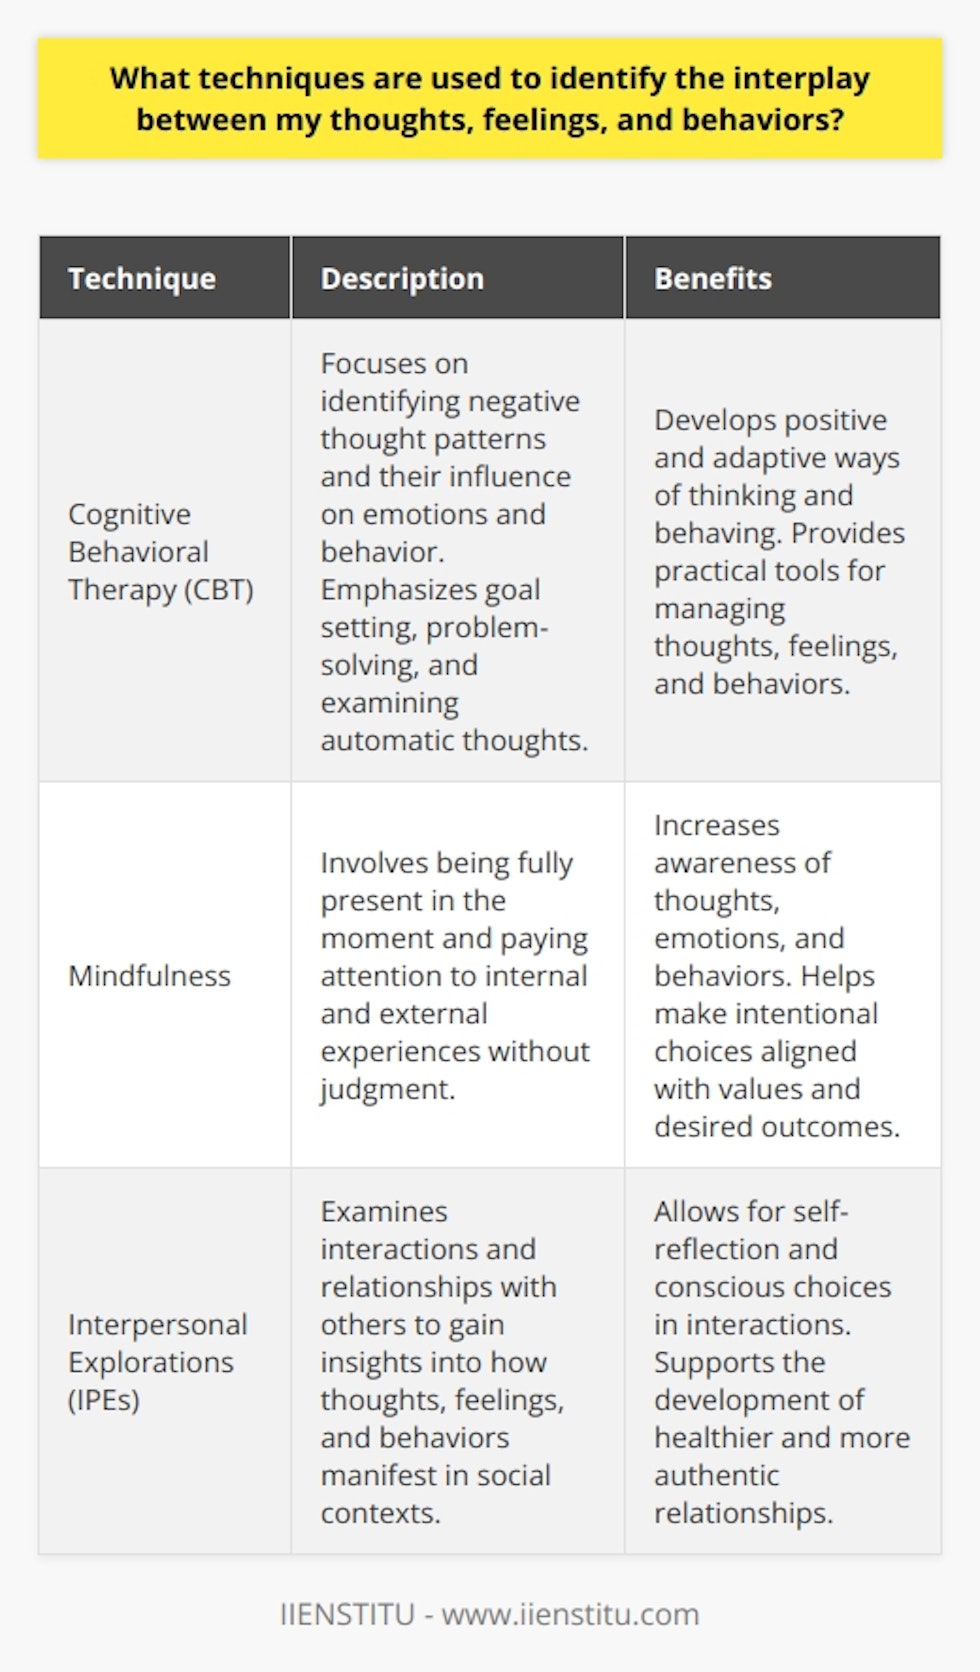 The interplay between thoughts, feelings, and behaviors is a complex and often understudied topic. However, several techniques can help individuals gain a better understanding of how these three elements are interconnected. One technique that is commonly used is Cognitive Behavioral Therapy (CBT). This form of therapy focuses on identifying negative thought patterns and how they may influence emotions and behavior. By recognizing and challenging these thoughts, individuals can develop more positive and adaptive ways of thinking and behaving. CBT also emphasizes goal setting, problem-solving, and examining automatic thoughts, providing individuals with practical tools to manage their thoughts, feelings, and behaviors.Another technique that can aid in identifying the interplay between thoughts, feelings, and behaviors is mindfulness. Mindfulness involves being fully present in the moment and paying attention to one's internal and external experiences without judgment. By practicing mindful awareness, individuals can become more attuned to their thoughts, emotions, and behaviors, gaining insight into how they are interconnected. This heightened awareness allows individuals to make more intentional choices that align with their values and desired outcomes.Interpersonal Explorations (IPEs) are another valuable technique for understanding the interplay between thoughts, feelings, and behaviors. IPEs involve exploring and reflecting on one's interactions and relationships with others. By examining how their thoughts, feelings, and behaviors manifest in social contexts, individuals can gain valuable insights into their interpersonal dynamics. This self-reflection allows individuals to make more conscious choices in their interactions and develop healthier and more authentic relationships.In conclusion, understanding the interplay between thoughts, feelings, and behaviors is crucial for personal growth and well-being. Techniques such as Cognitive Behavioral Therapy, mindfulness, and interpersonal explorations can help individuals gain insight into how these three elements are interconnected and use this knowledge to make positive changes in their lives. By recognizing and managing their thoughts, feelings, and behaviors, individuals can lead more fulfilling and balanced lives.